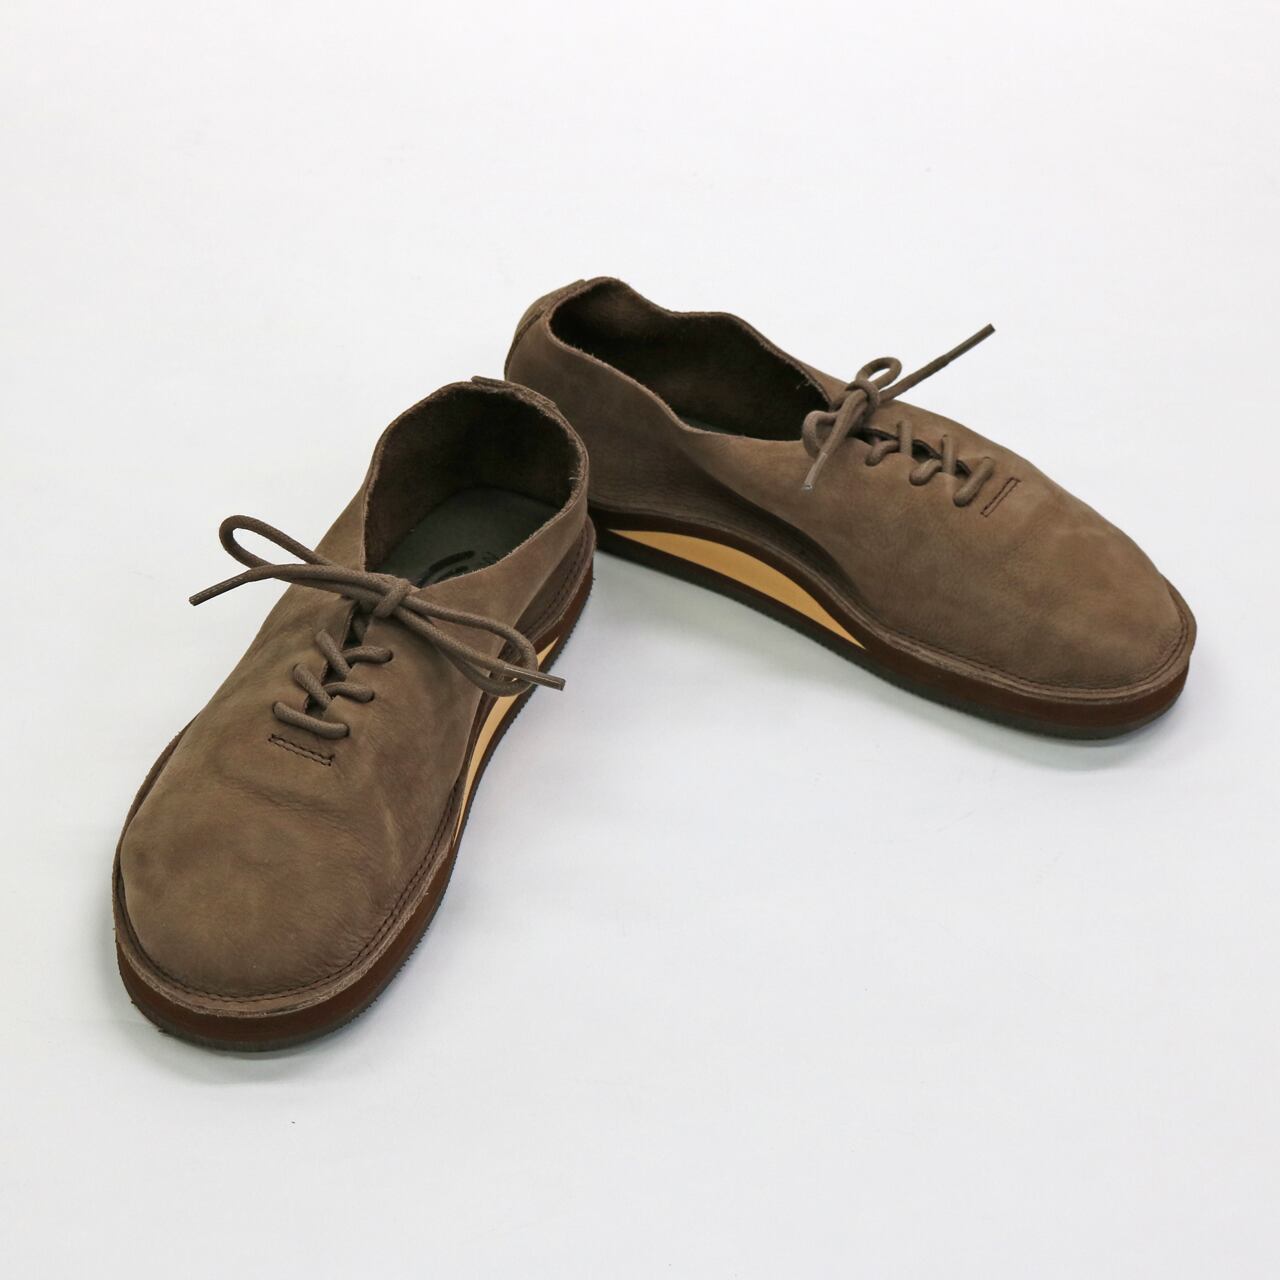 RAINBOW SANDALS  Men's Mocca Shoe / EXPR (プレミア・レザー)